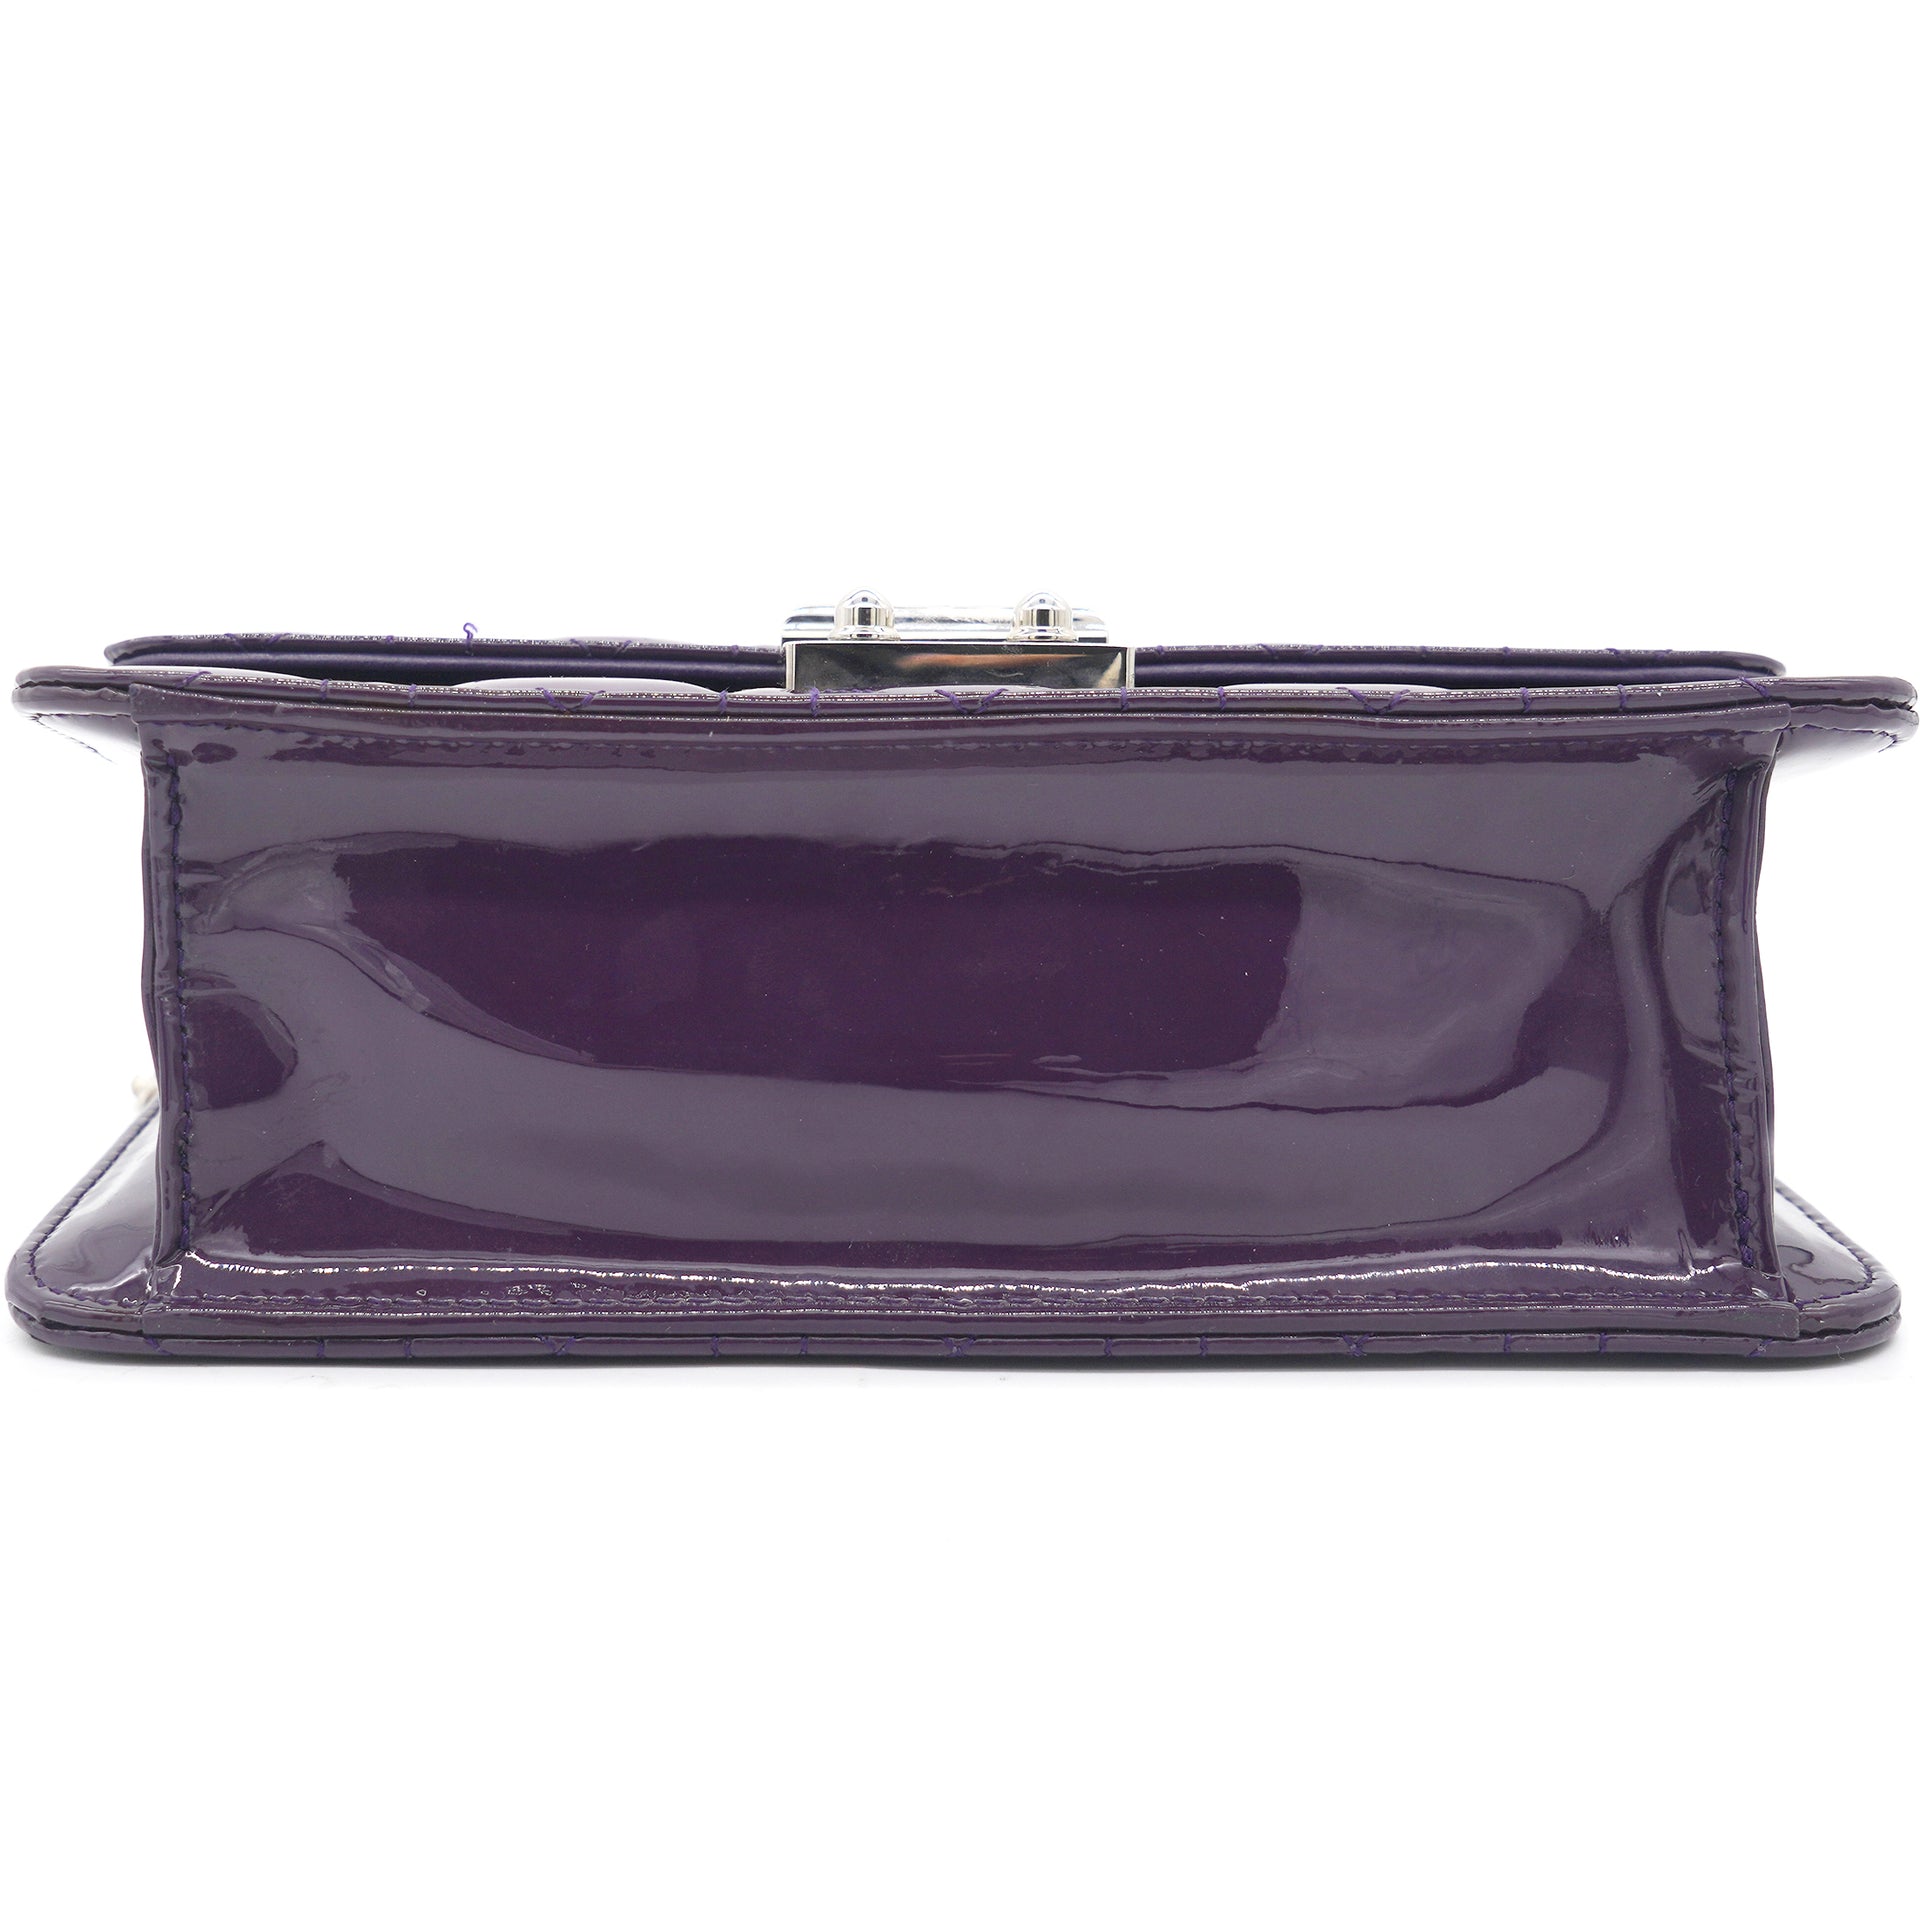 Purple Quilted Patent Miss Dior Flap Bag